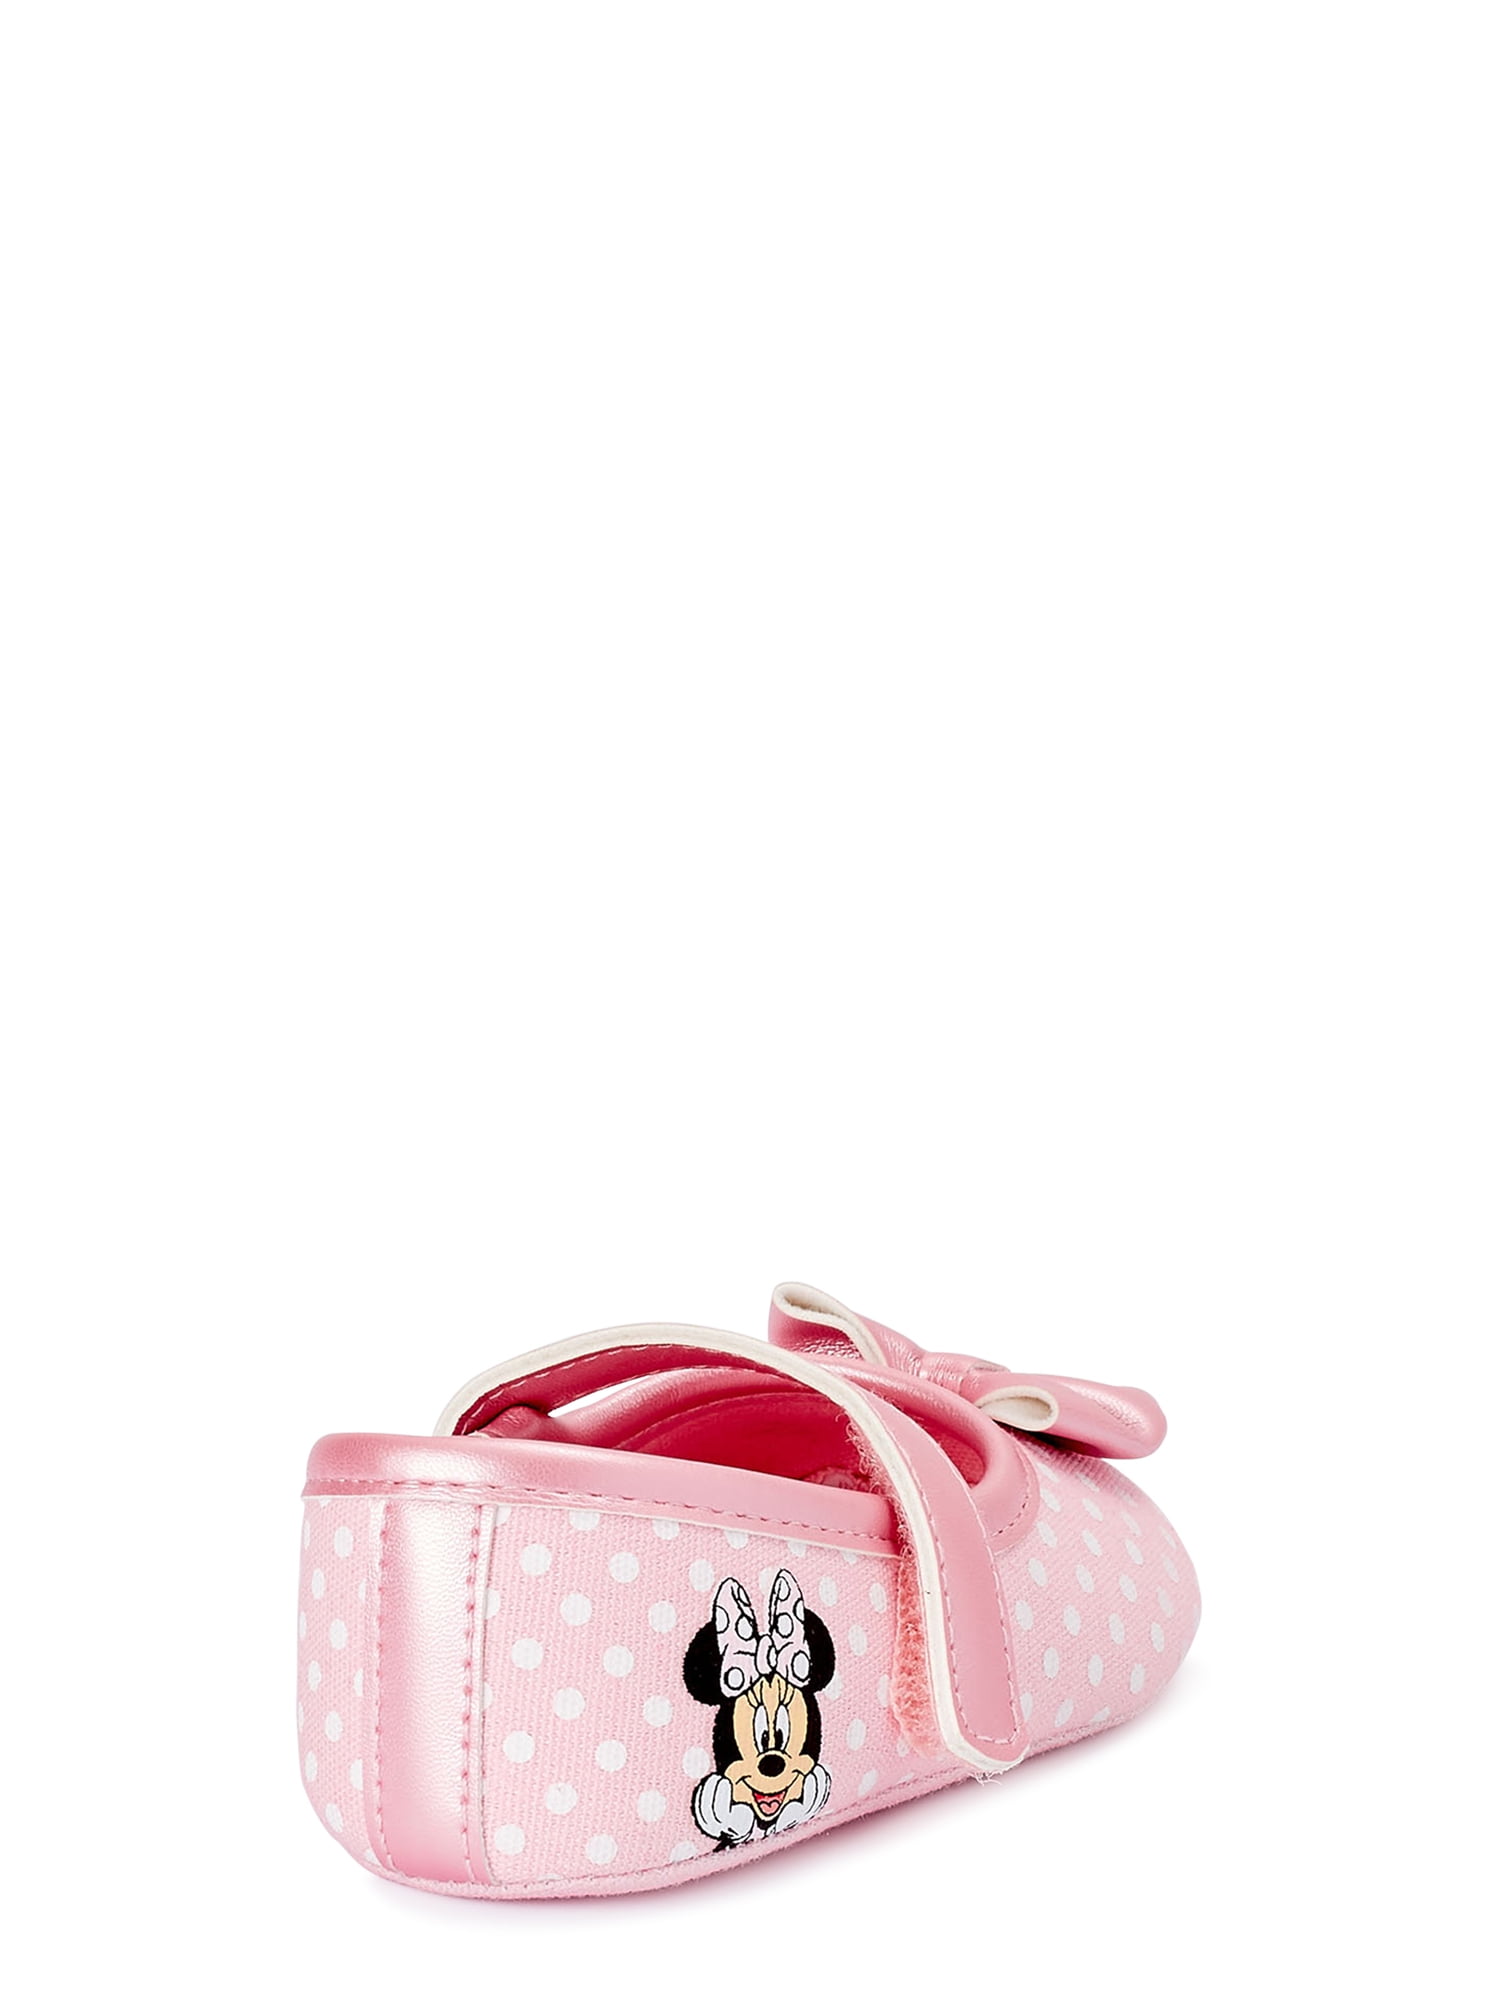 Minnie Mouse Infant Girls' Polka Dot Mary Jane Shoes